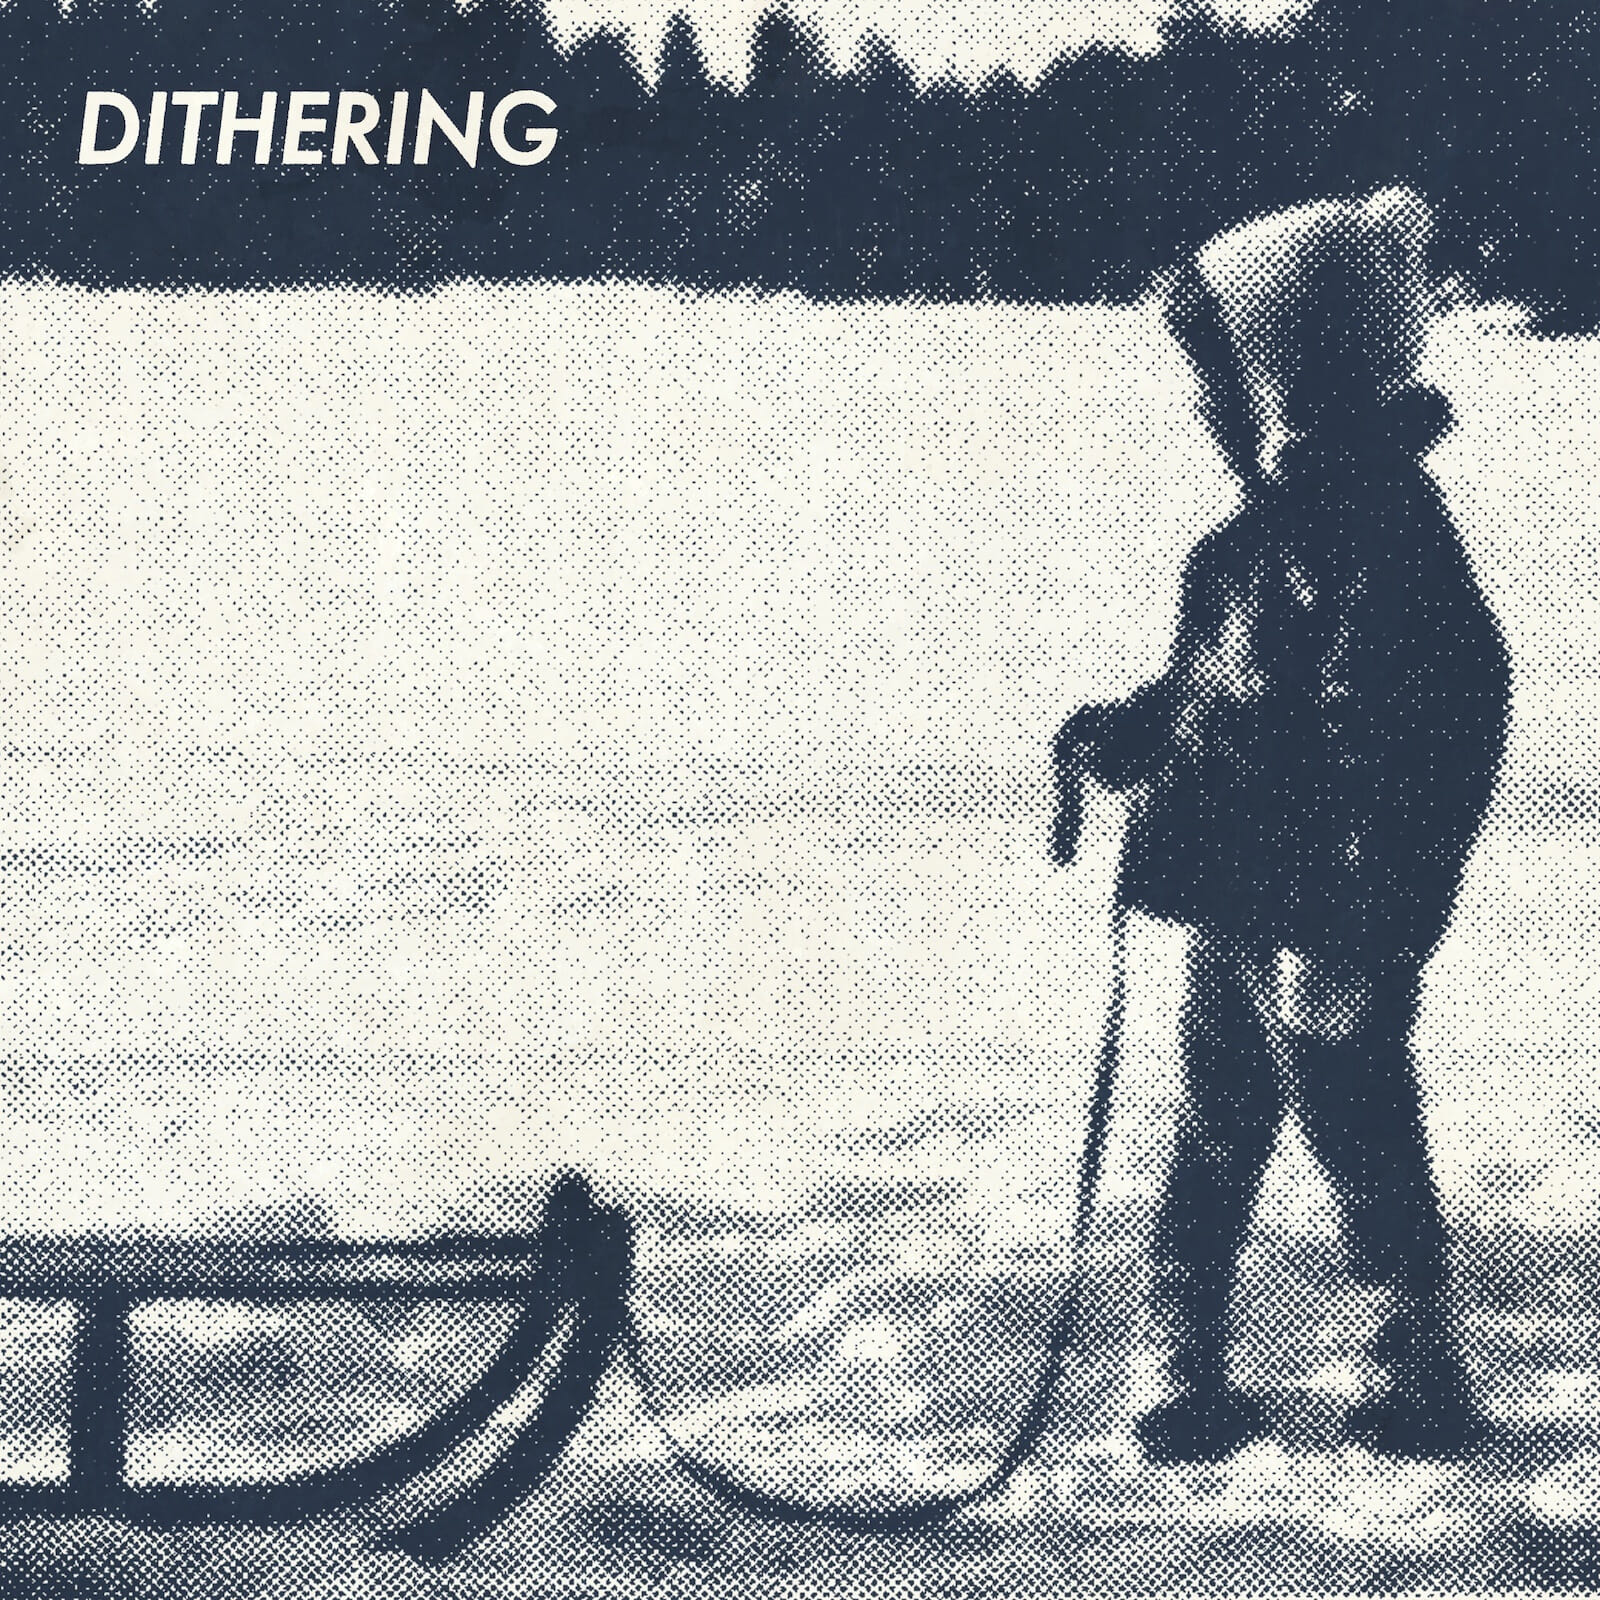 January 2022 cover art for Dithering, depicting a kid with a sled on a snowy field.